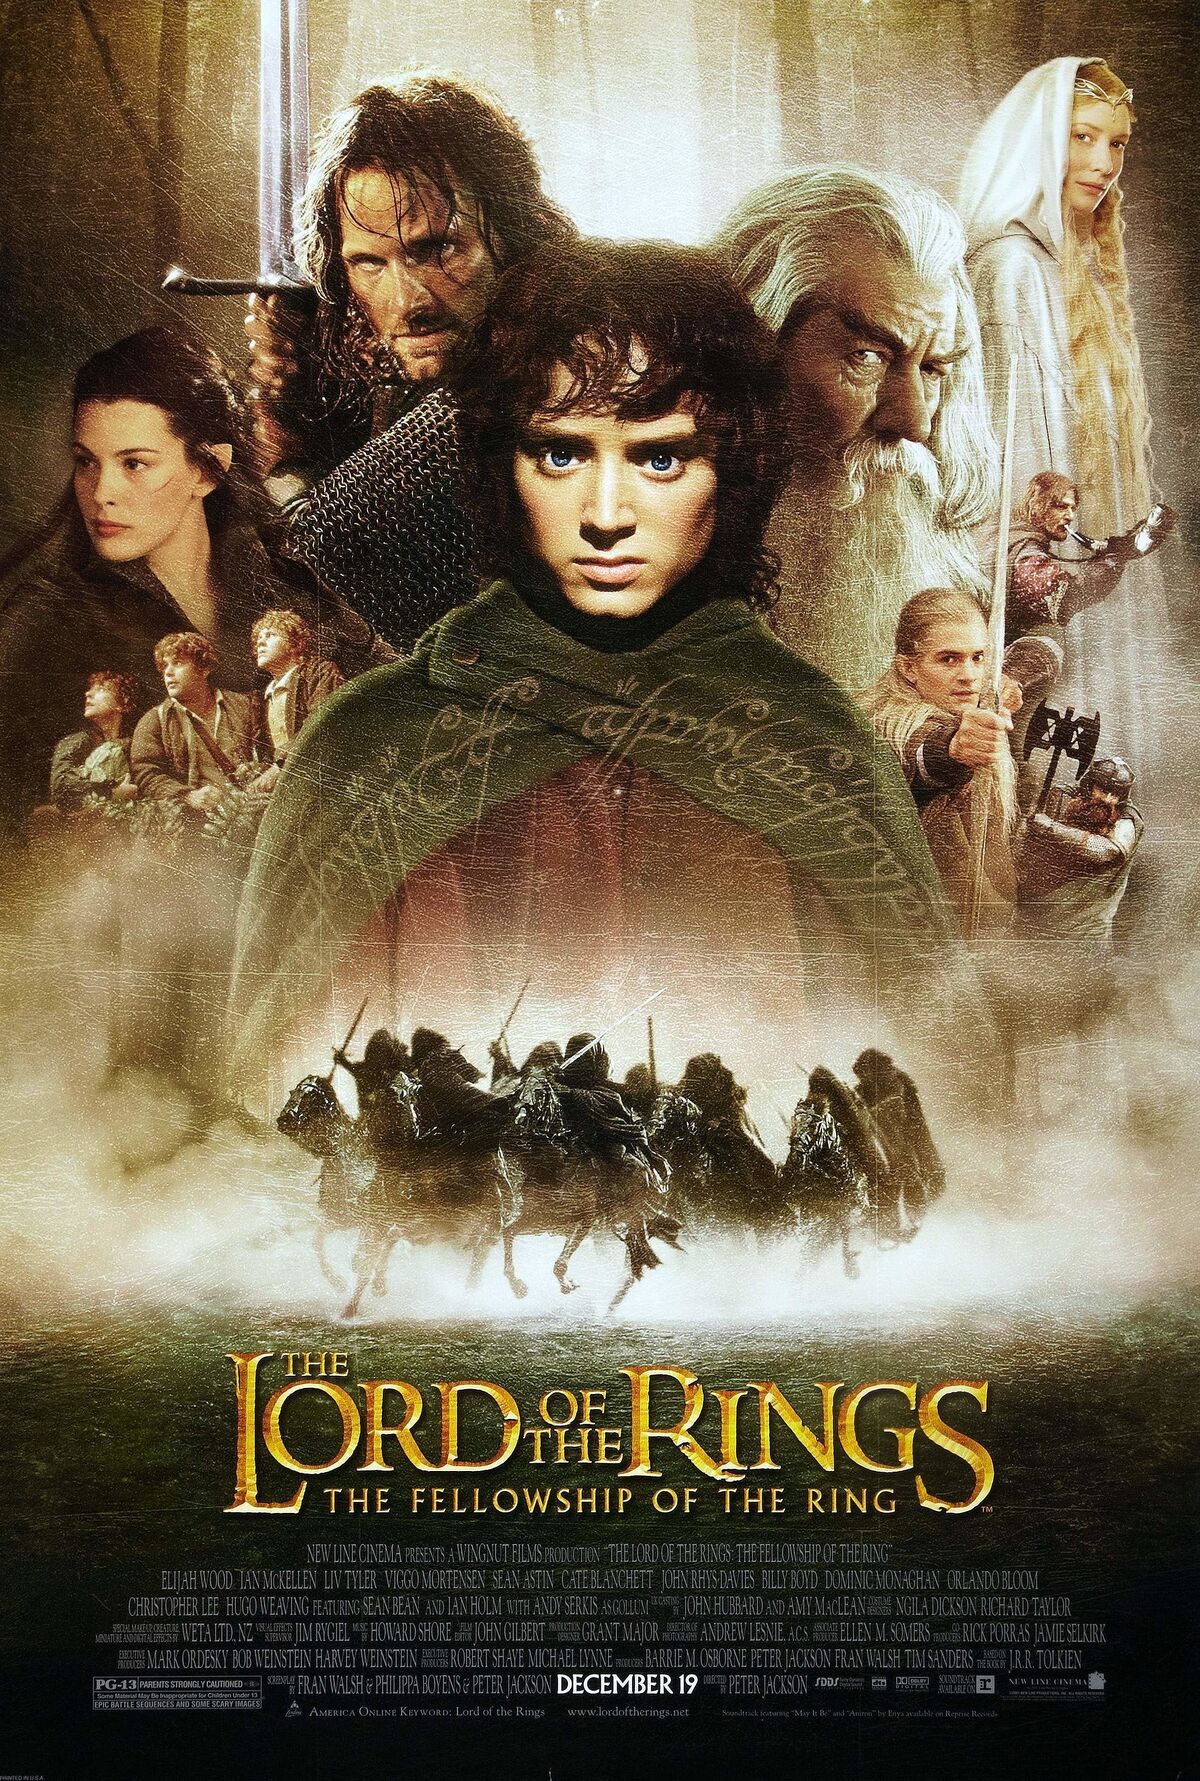 The Lord of the Rings oral history: The Fellowship of the Ring at